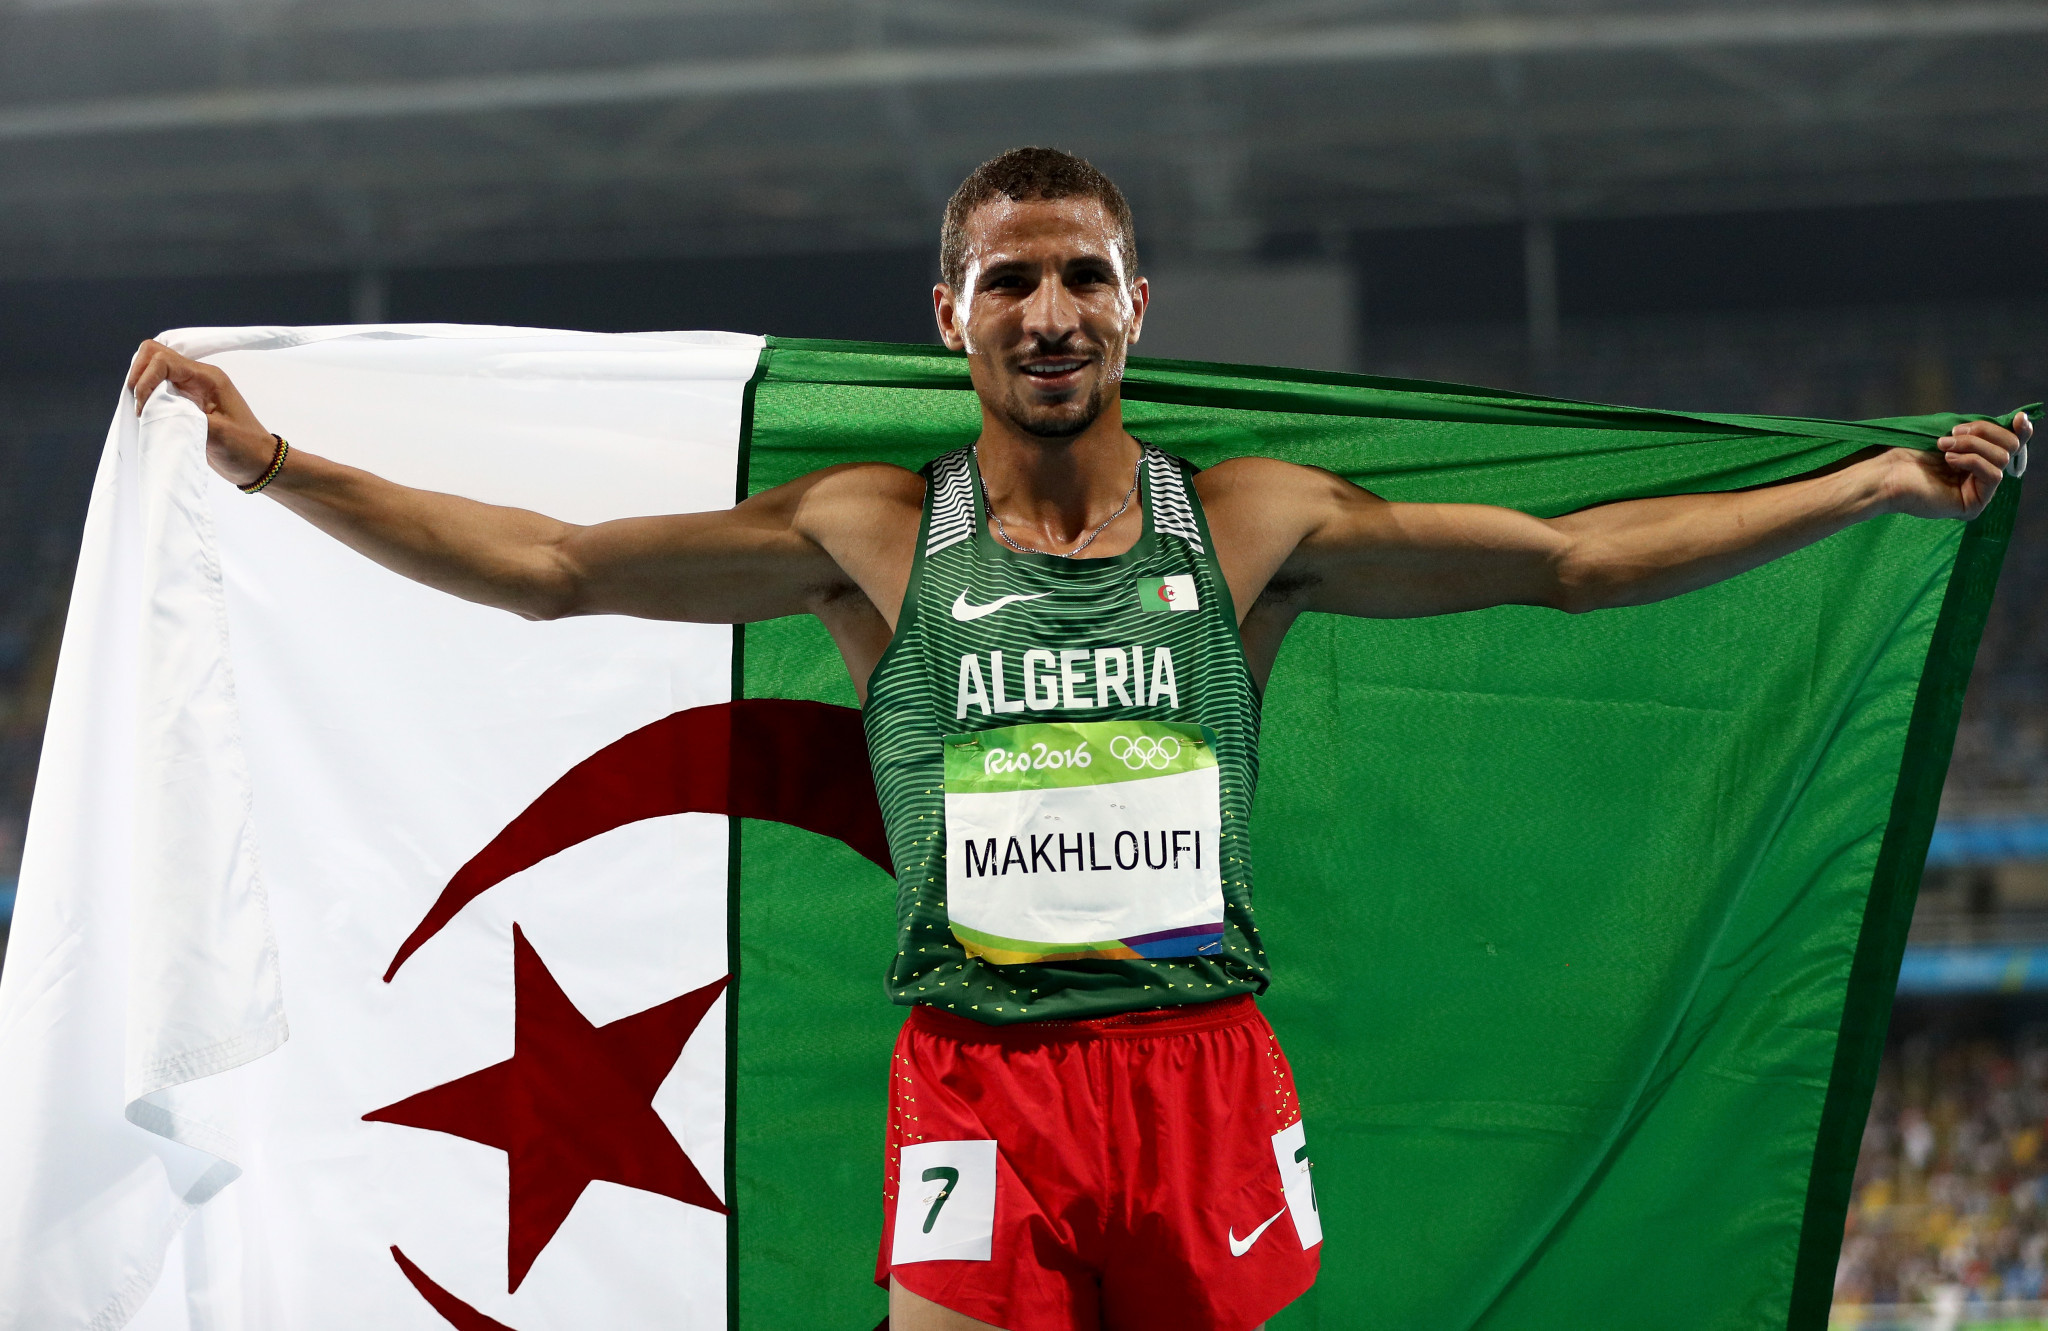 The courses are designed to improve governance in Algerian sport ©Getty Images